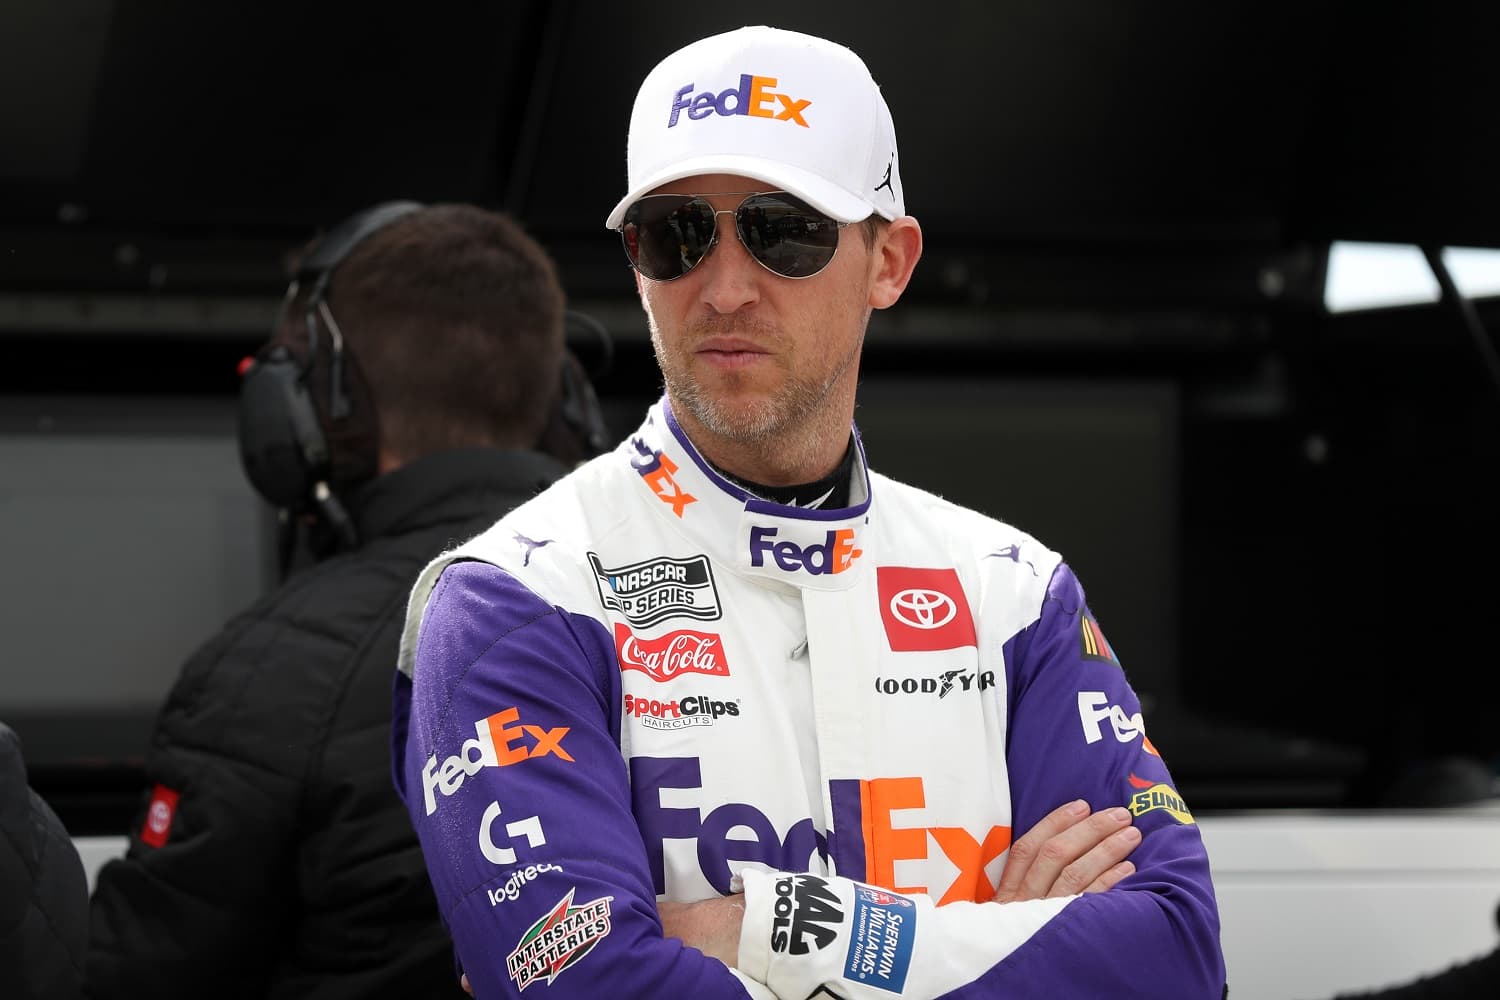 Denny Hamlin waits on the grid during practice for the NASCAR Cup Series Pennzoil 400 at Las Vegas Motor Speedway on March 4, 2023. | Meg Oliphant/Getty Images